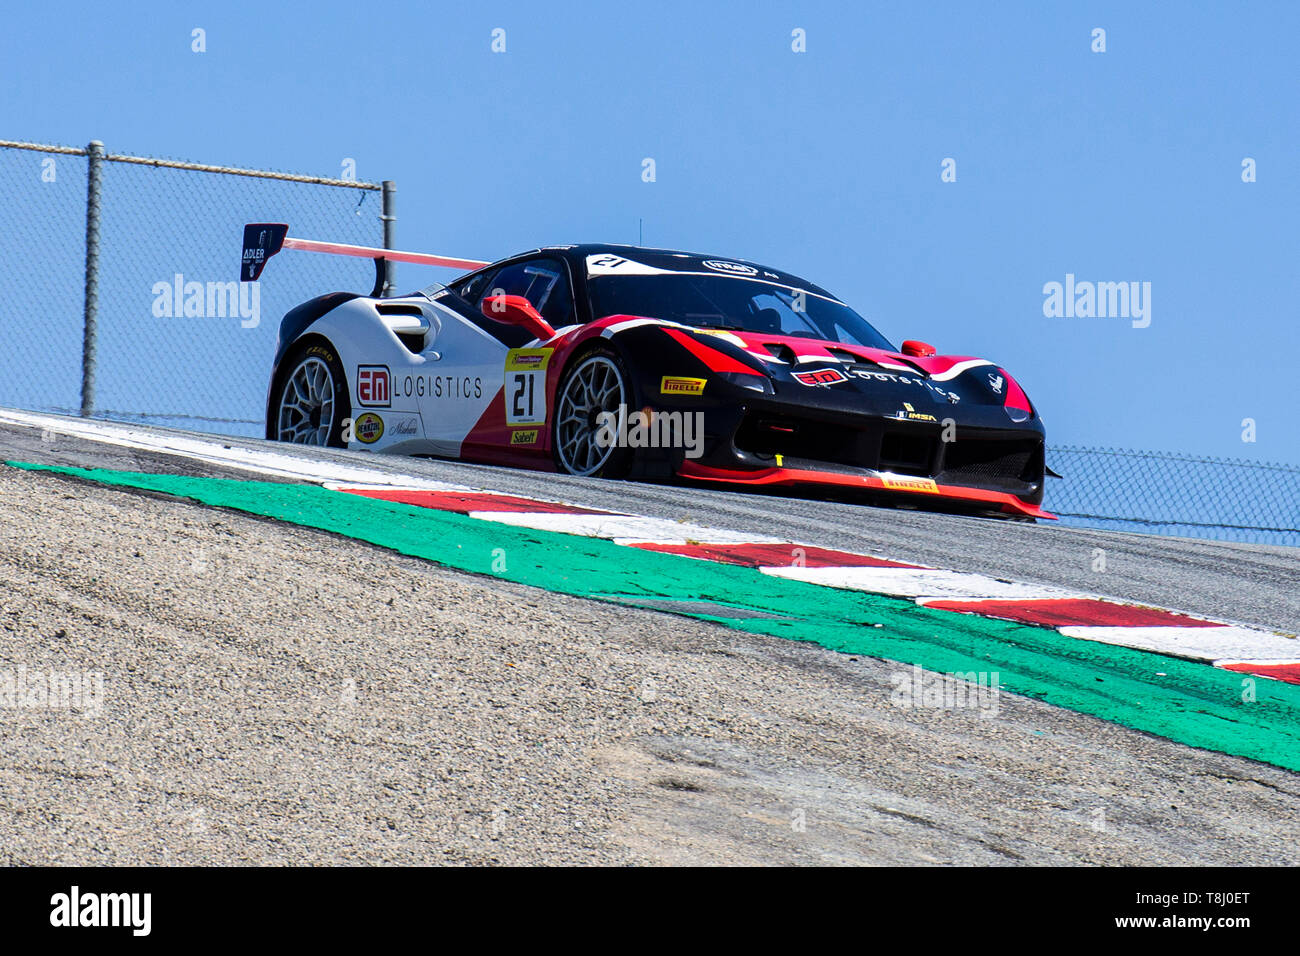 May 11 2019 Monterey CA, U.S.A. #21 Danny Baker of new country competizion coming into the Corkscrew during the Ferrari Challenge Race 1 P/P- AM at Weathertech Raceway Laguna Seca Monterey CA Thurman James/CSM Stock Photo